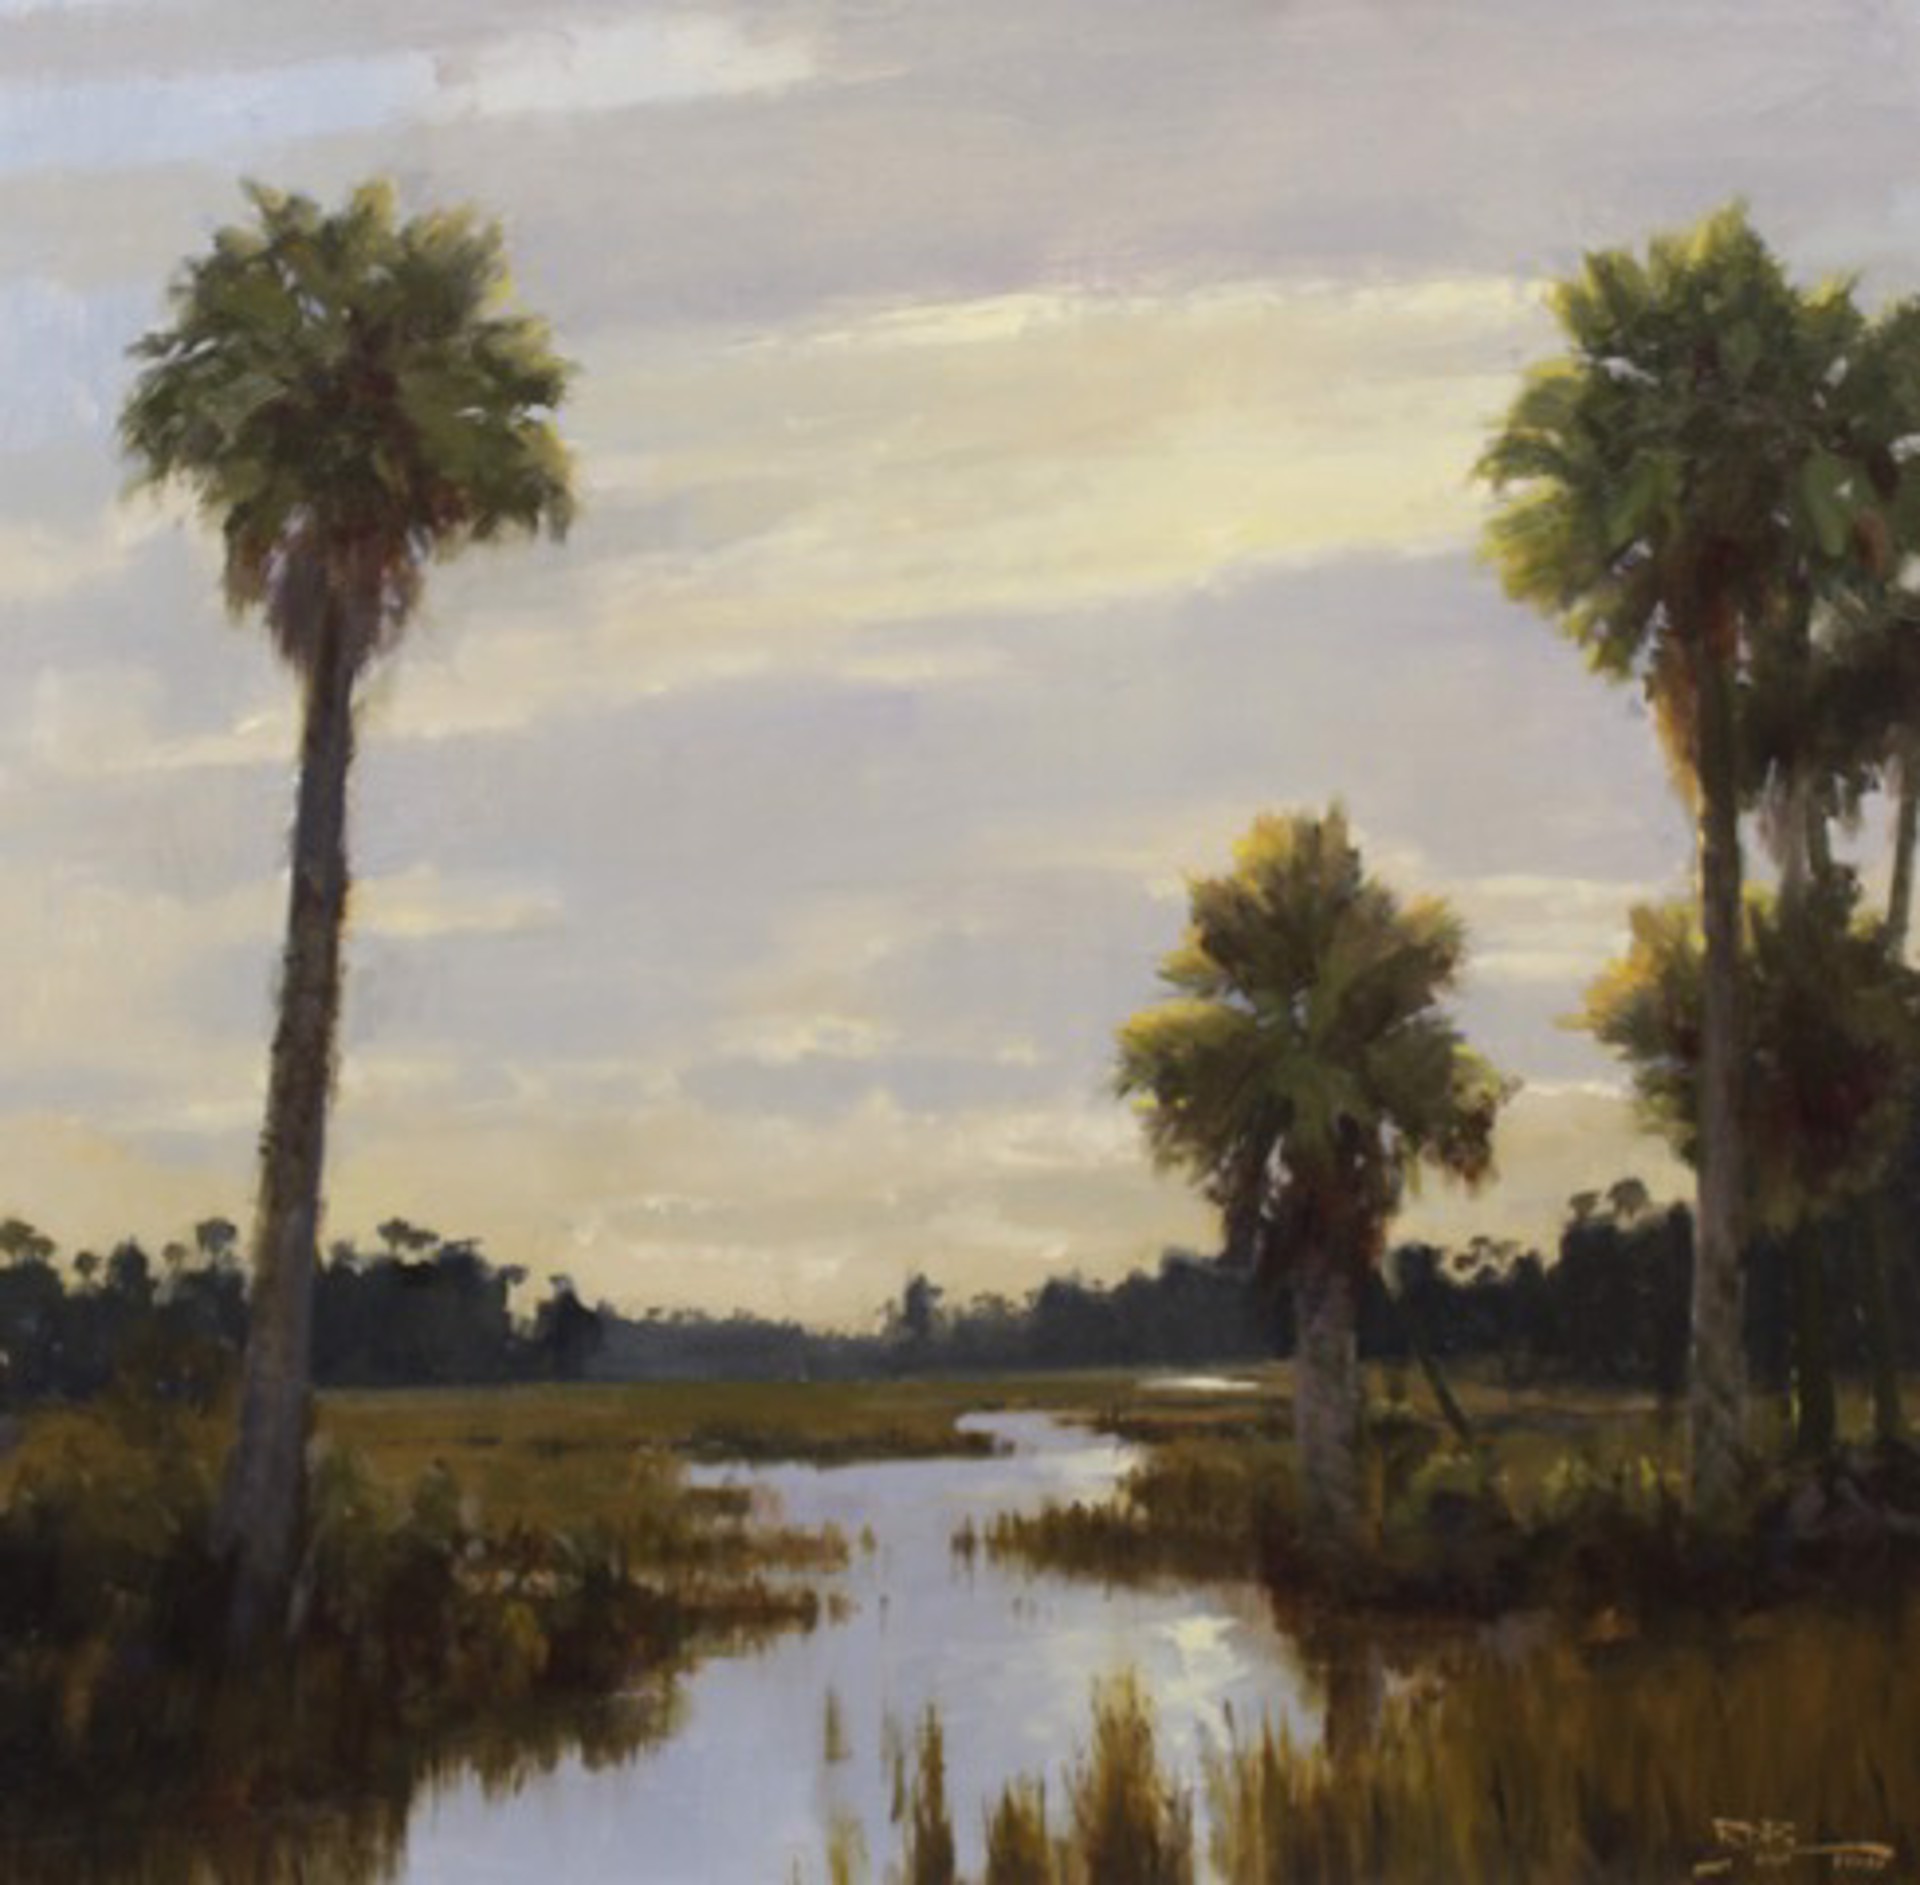 Sunset Palms by Roger Dale Brown